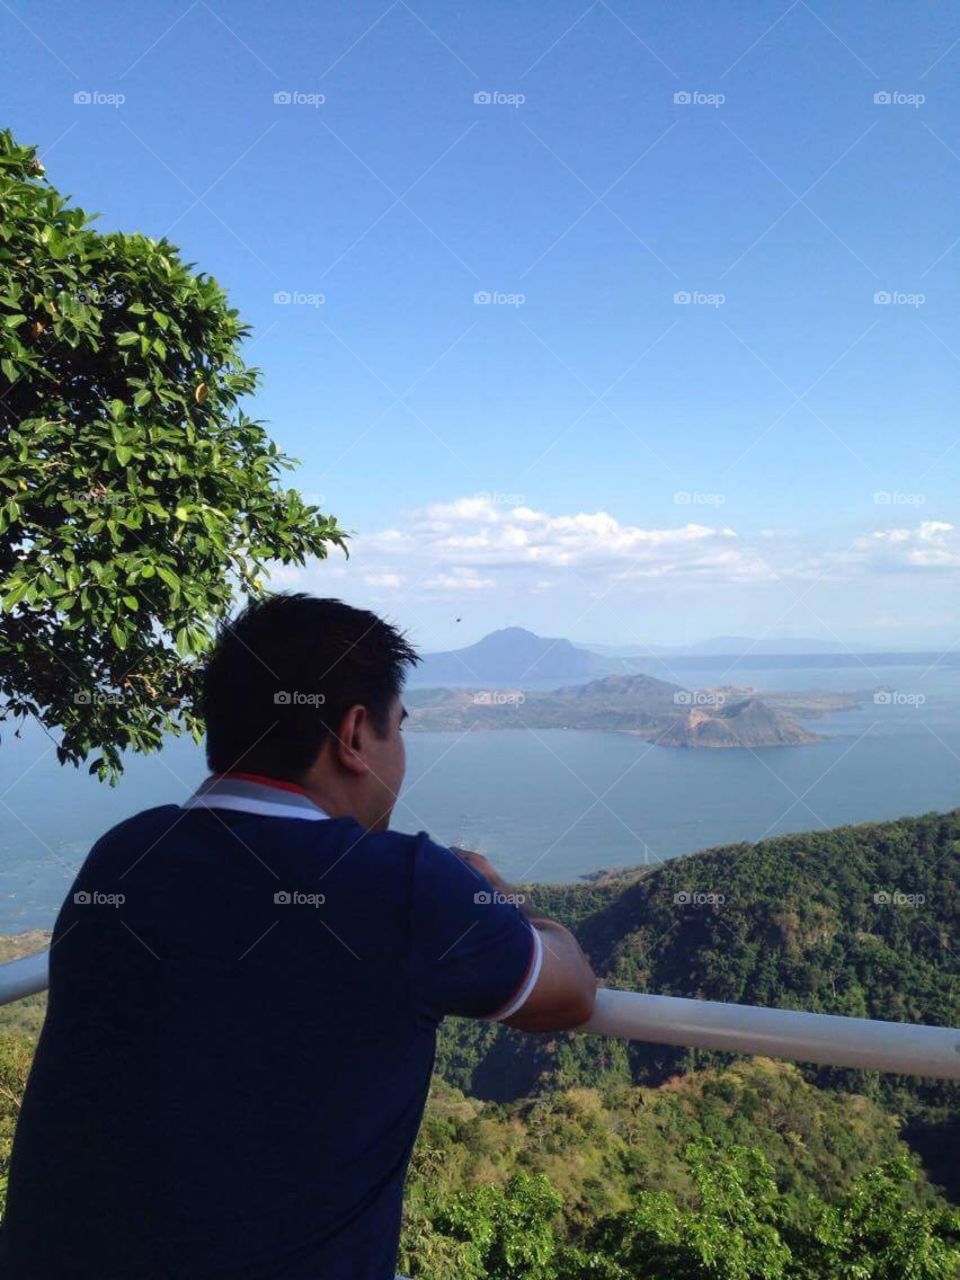 Enjoying the view of the smallest Volcano on earth, Taal Volcano